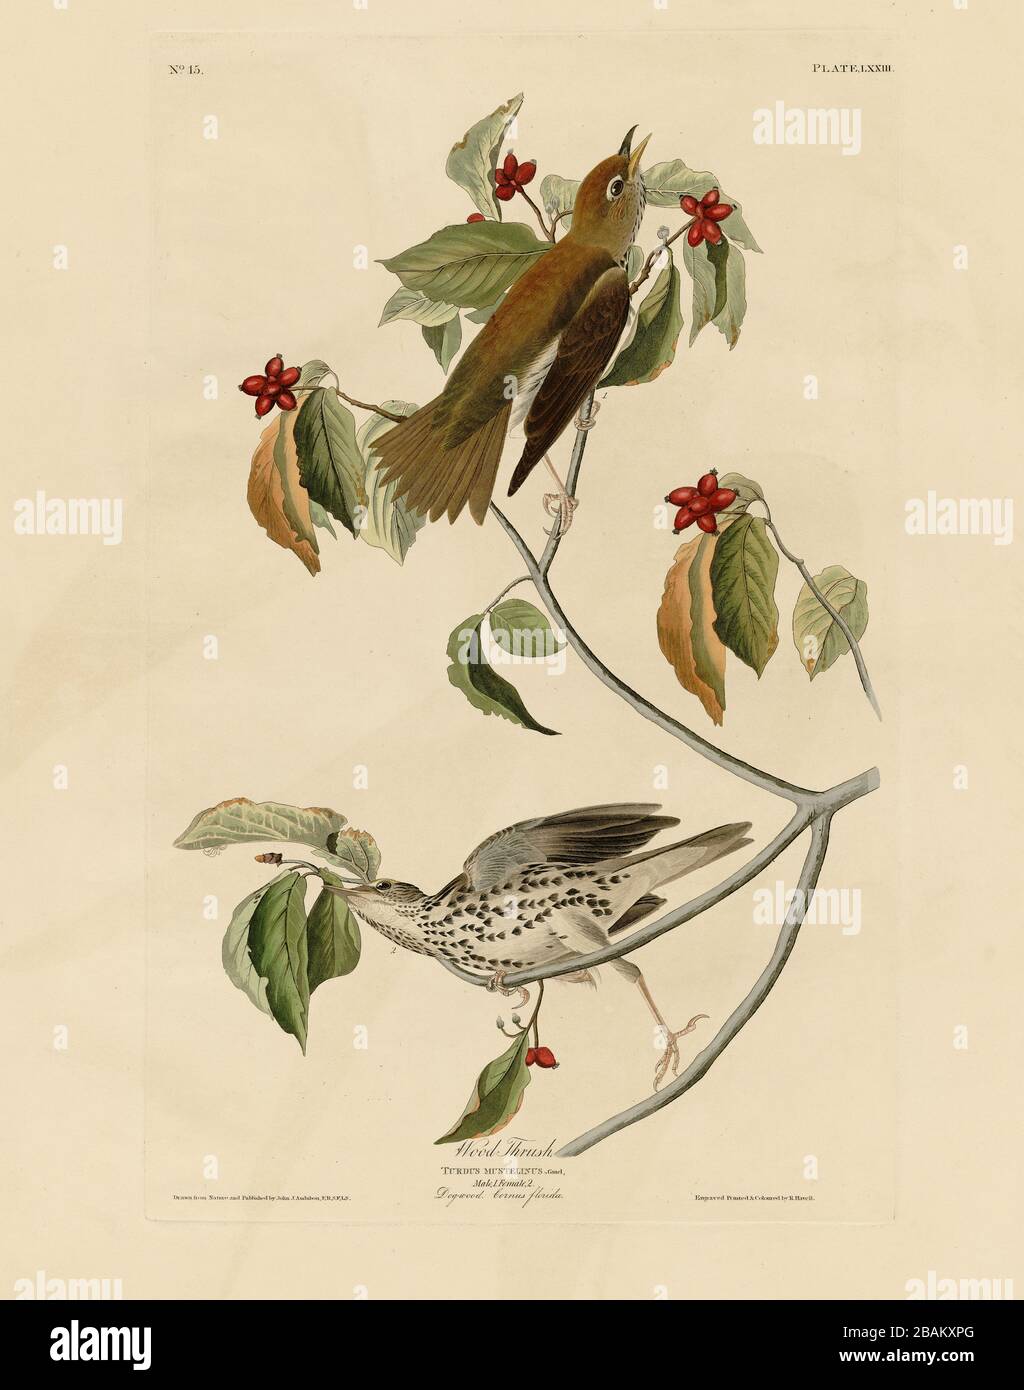 Plate 73 Wood Thrush from The Birds of America folio (1827–1839) by John James Audubon - Very high resolution and quality edited image Stock Photo